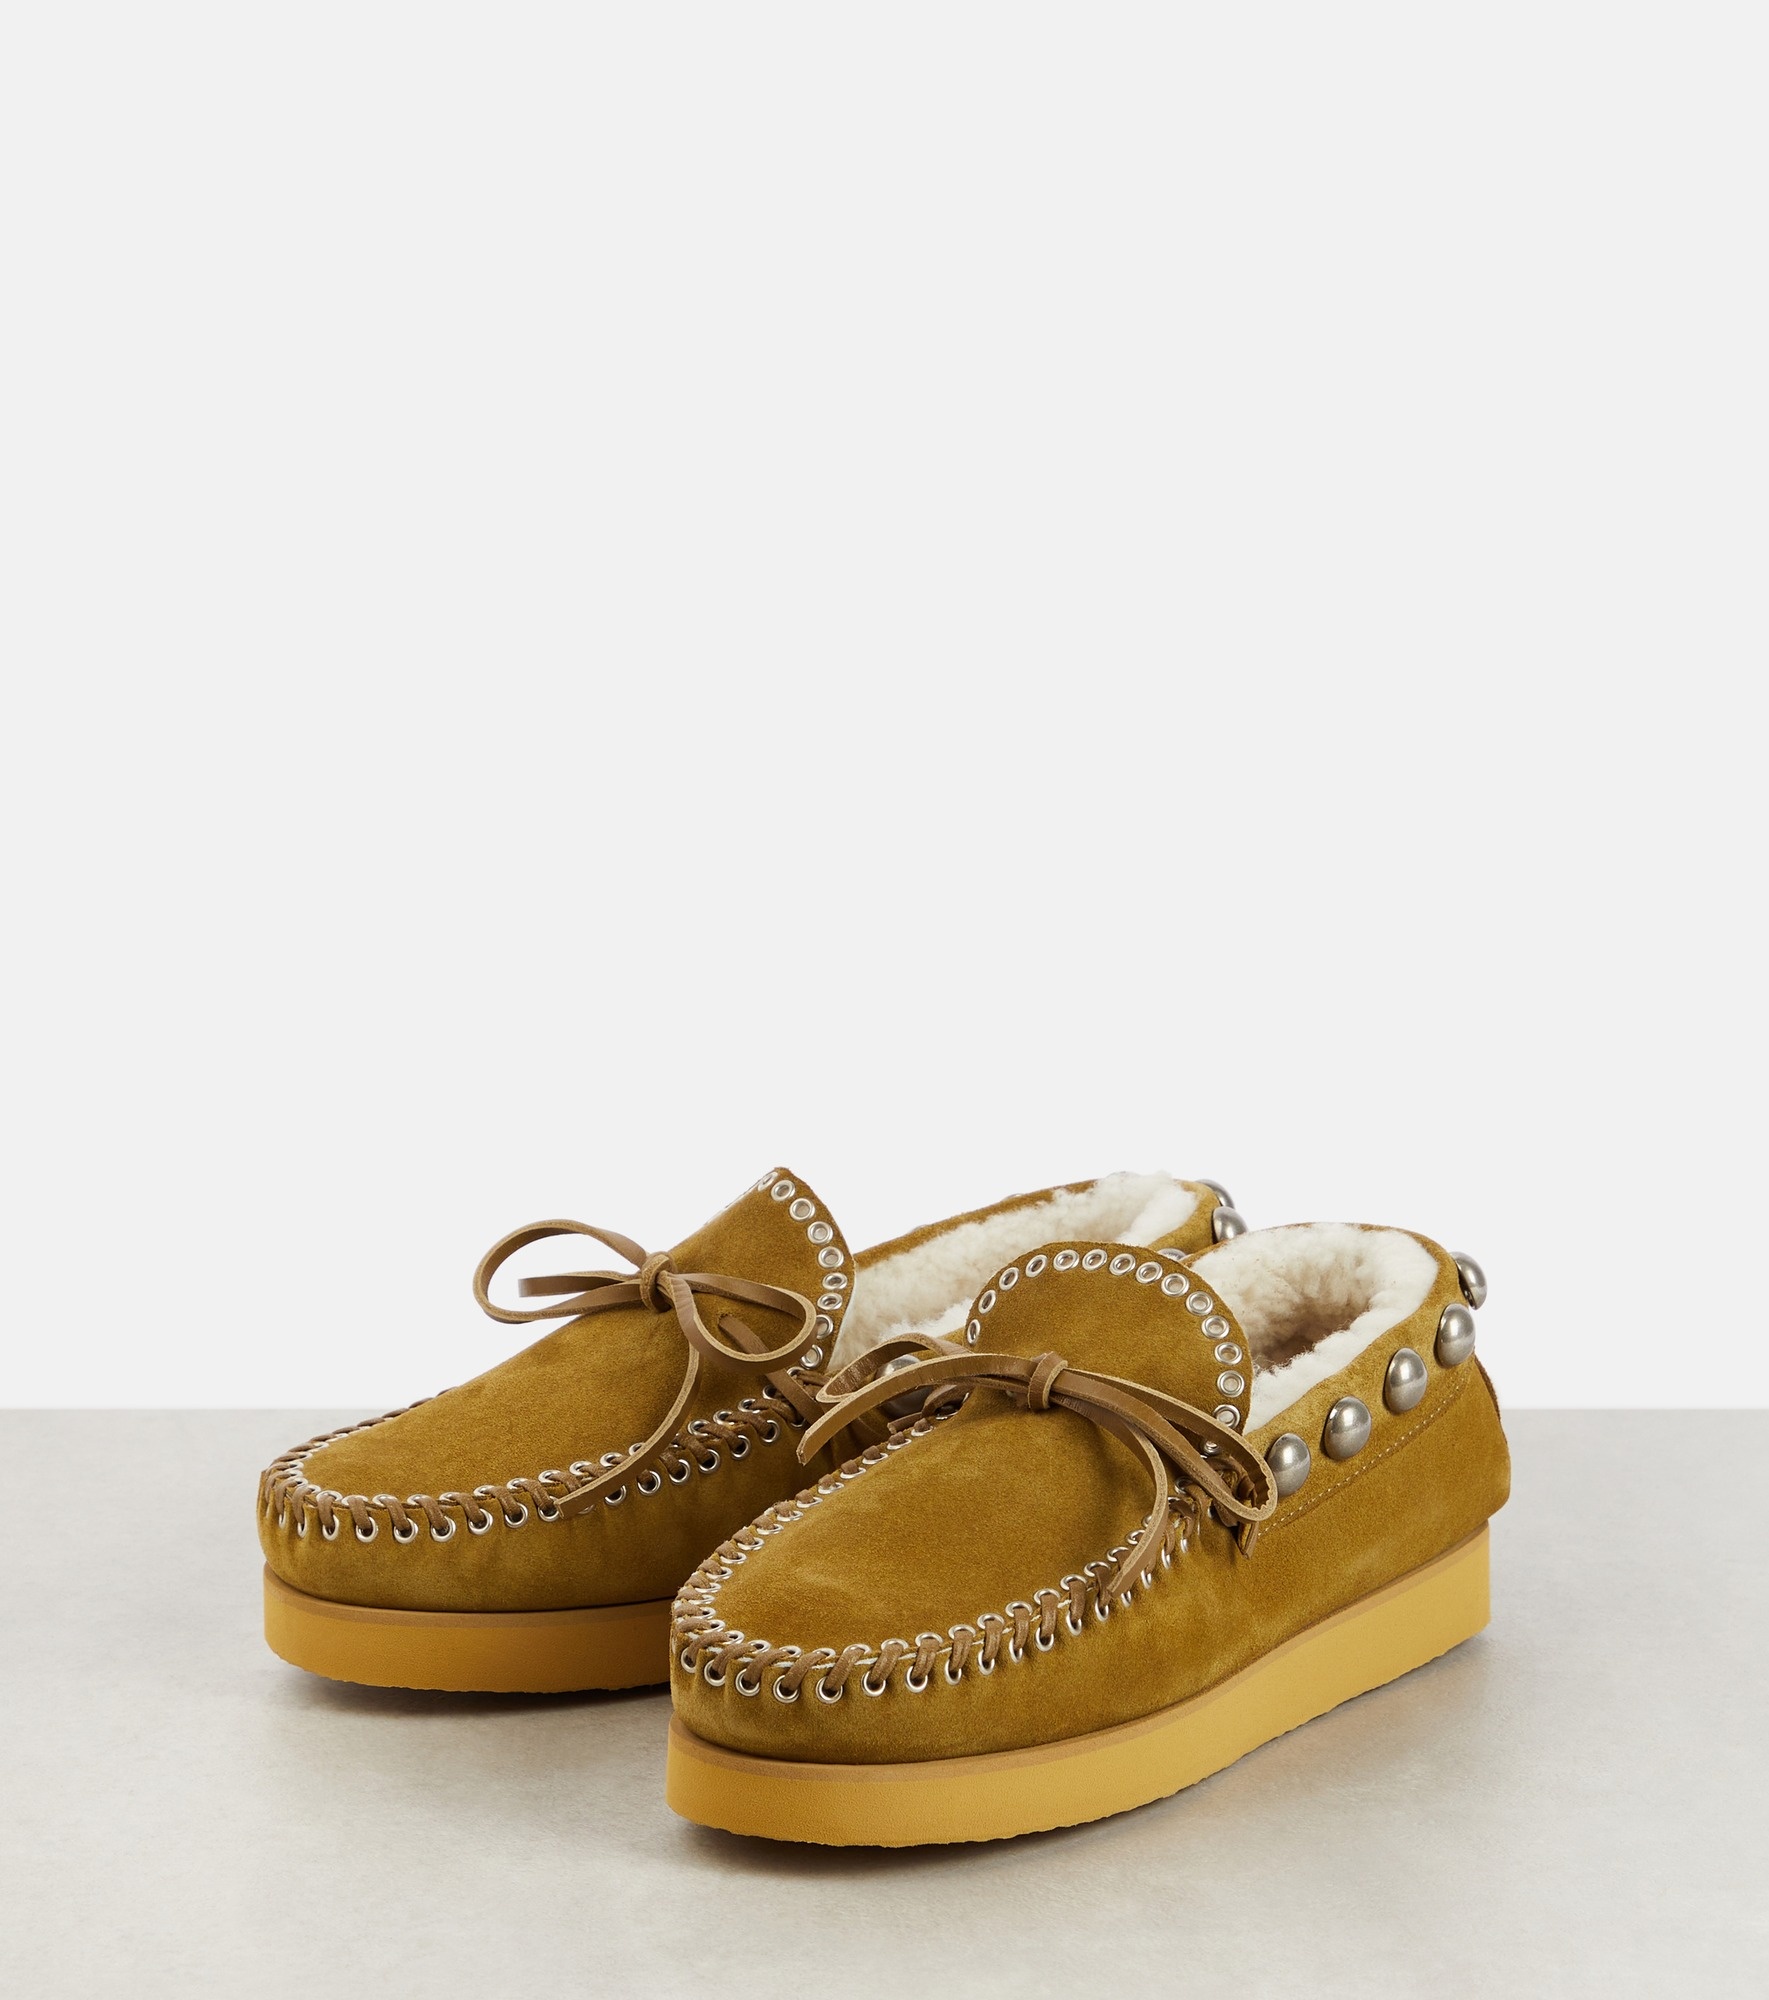 Forley shearling-lined suede moccasins - 5